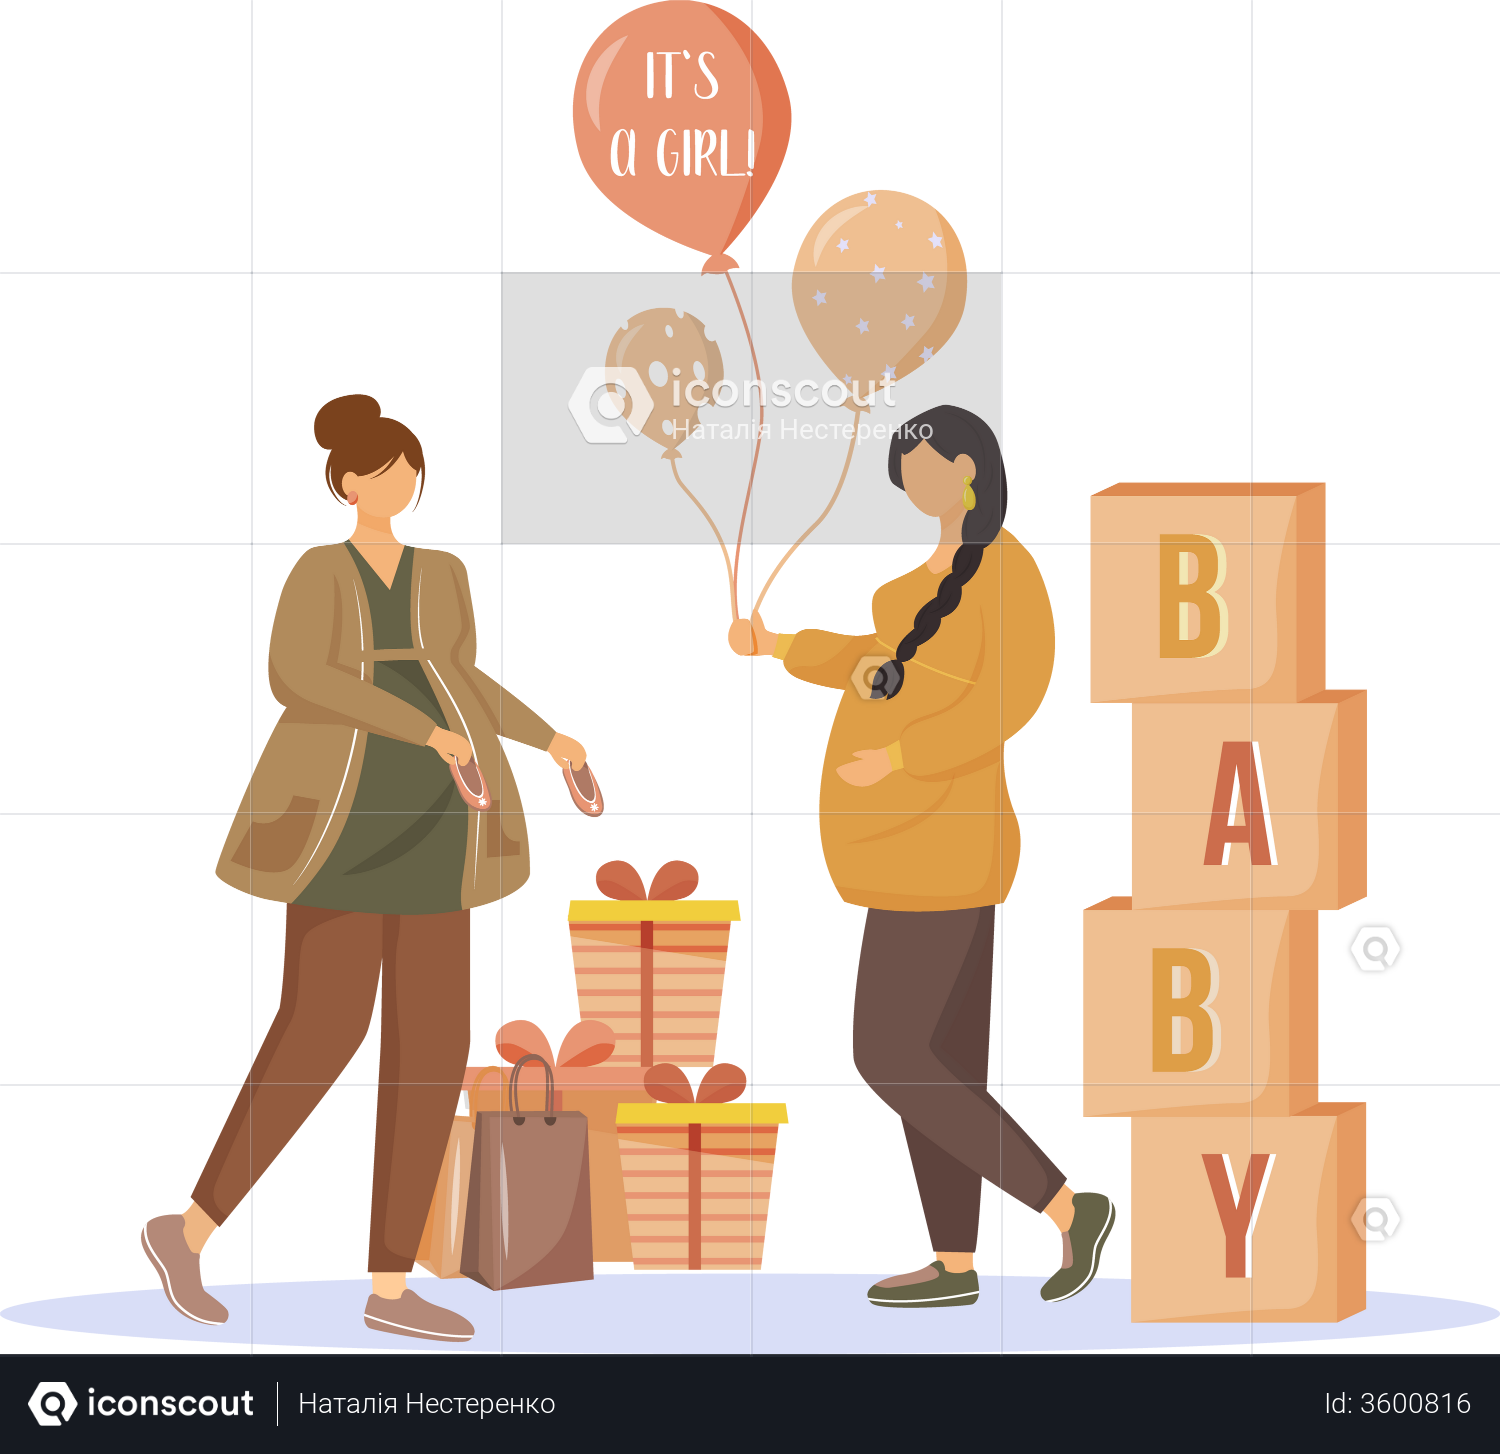 Best Gifts for Pregnant Women - Gifts for Pregnant Wife or Friend